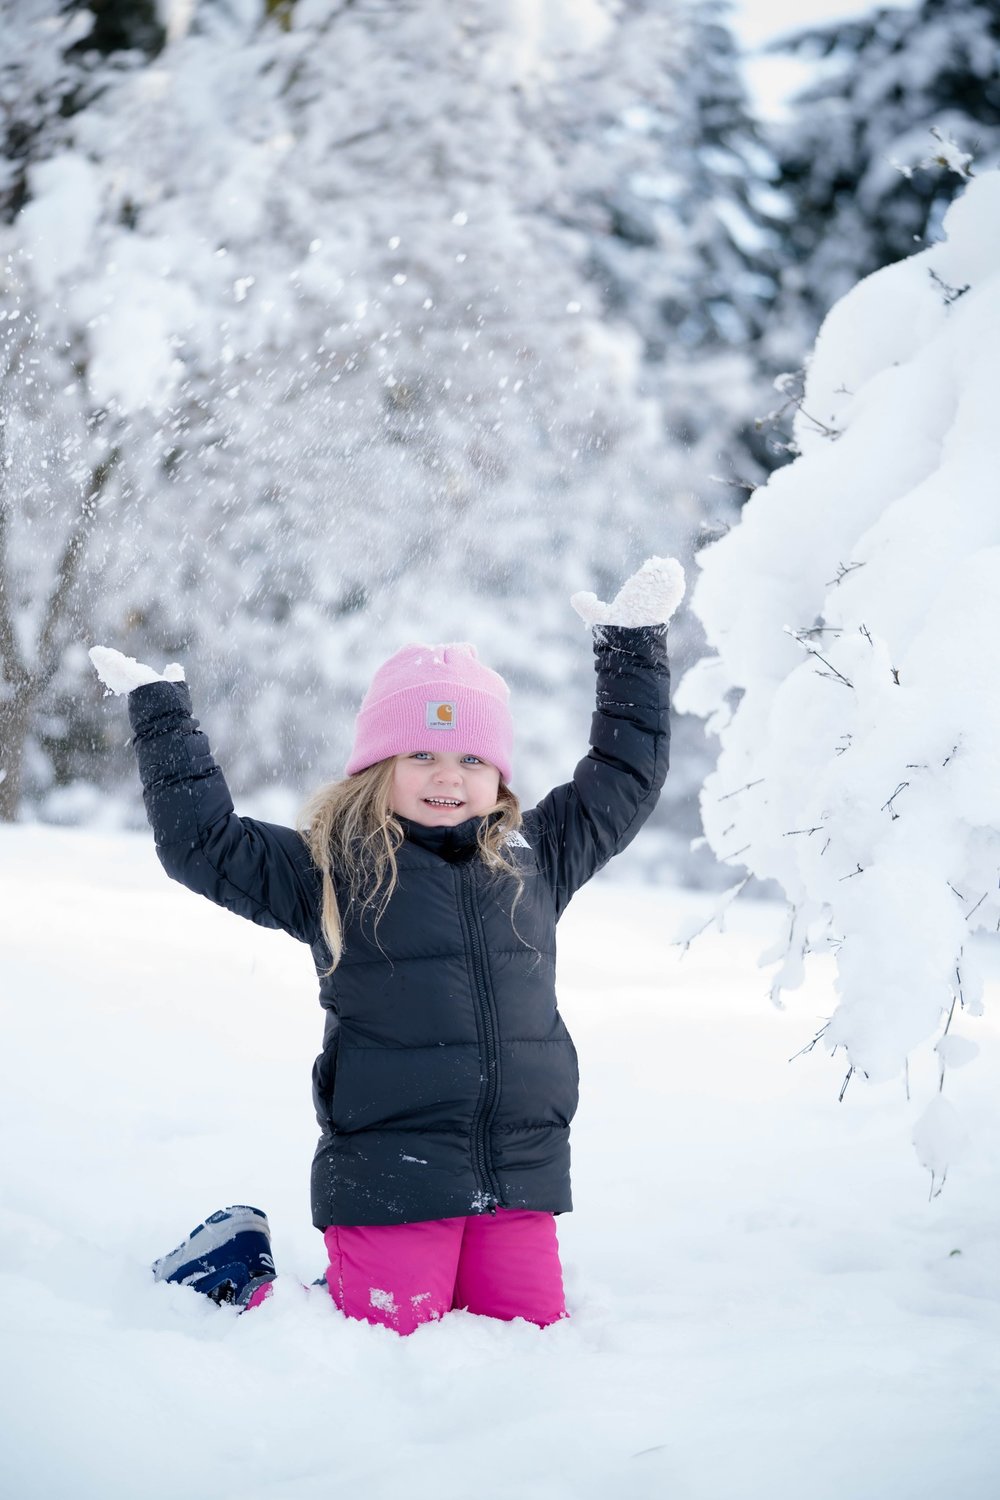 Eleanor Randall, 4, plays in the snow in this photo submitted by Leah Randall.